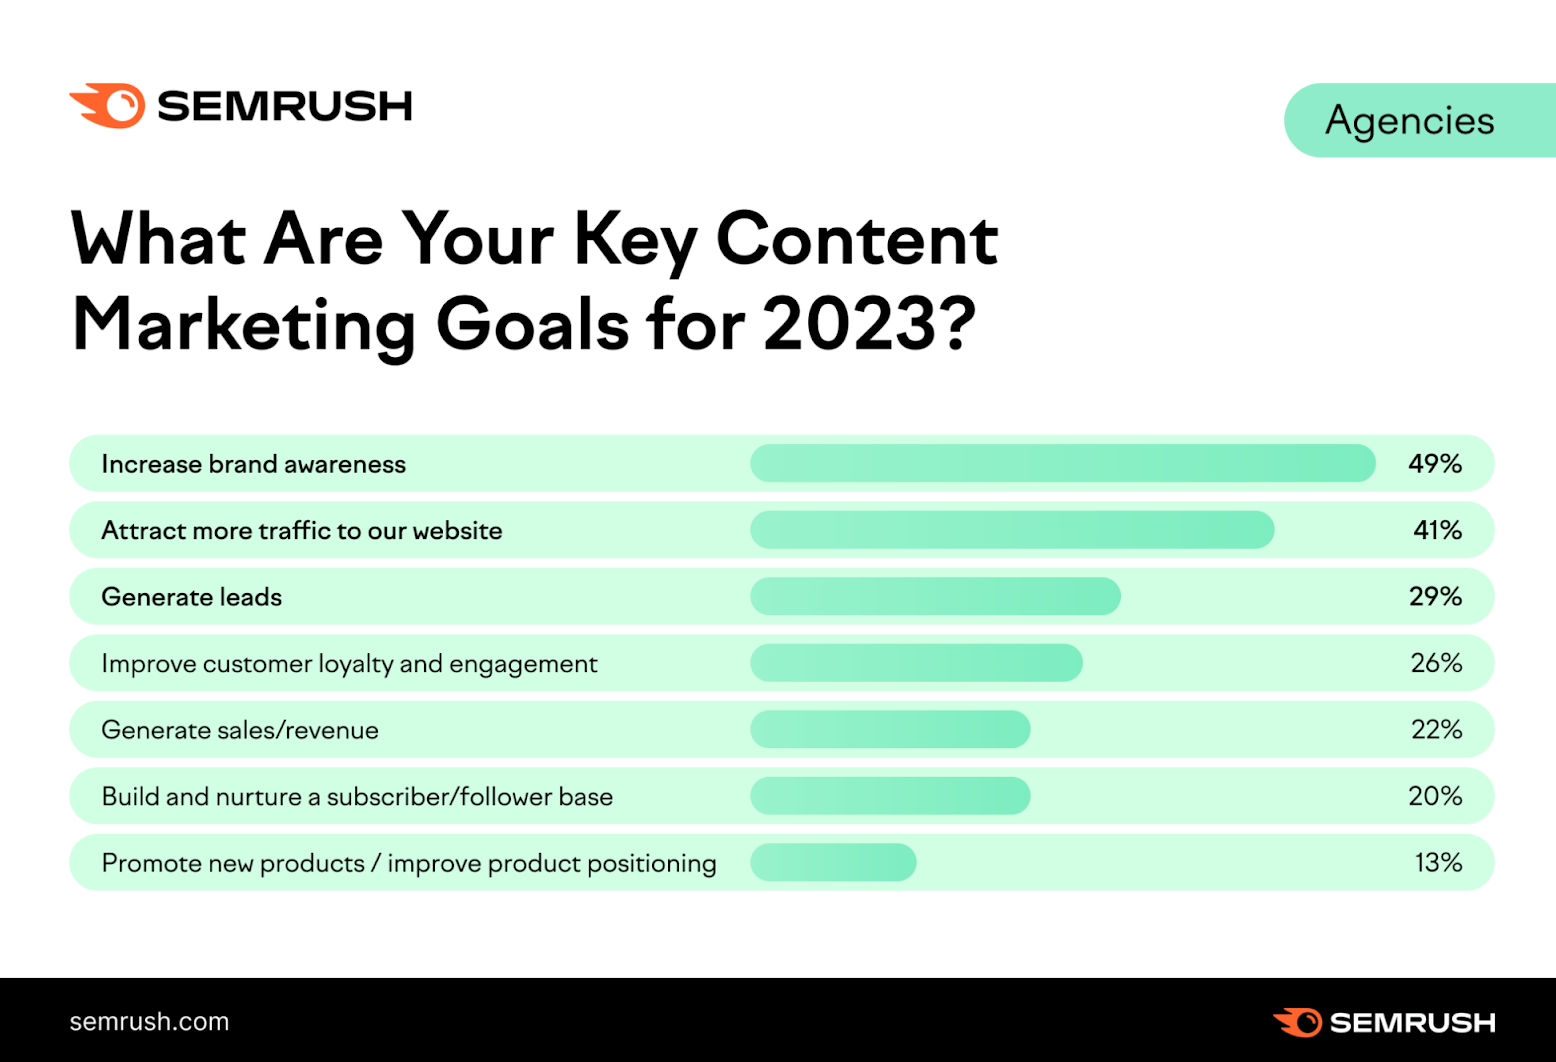 A visual showing Semrush's research data on responders' key marketing goals for 2023